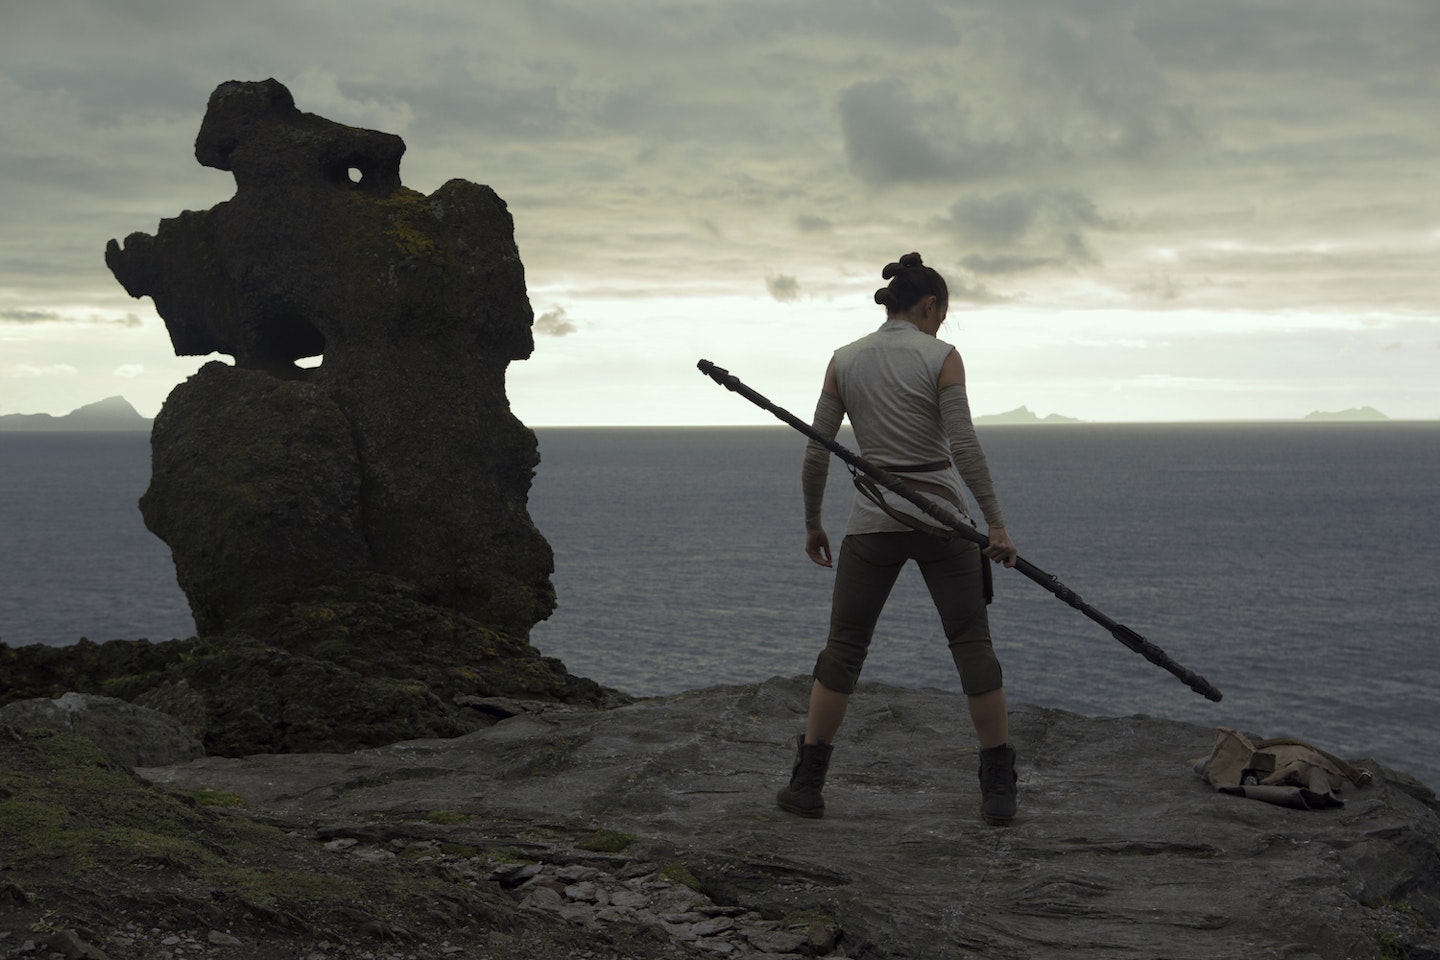 Star Wars: Episode VIII - The Last Jedi (2017) Review — Jacob Writes  Forever